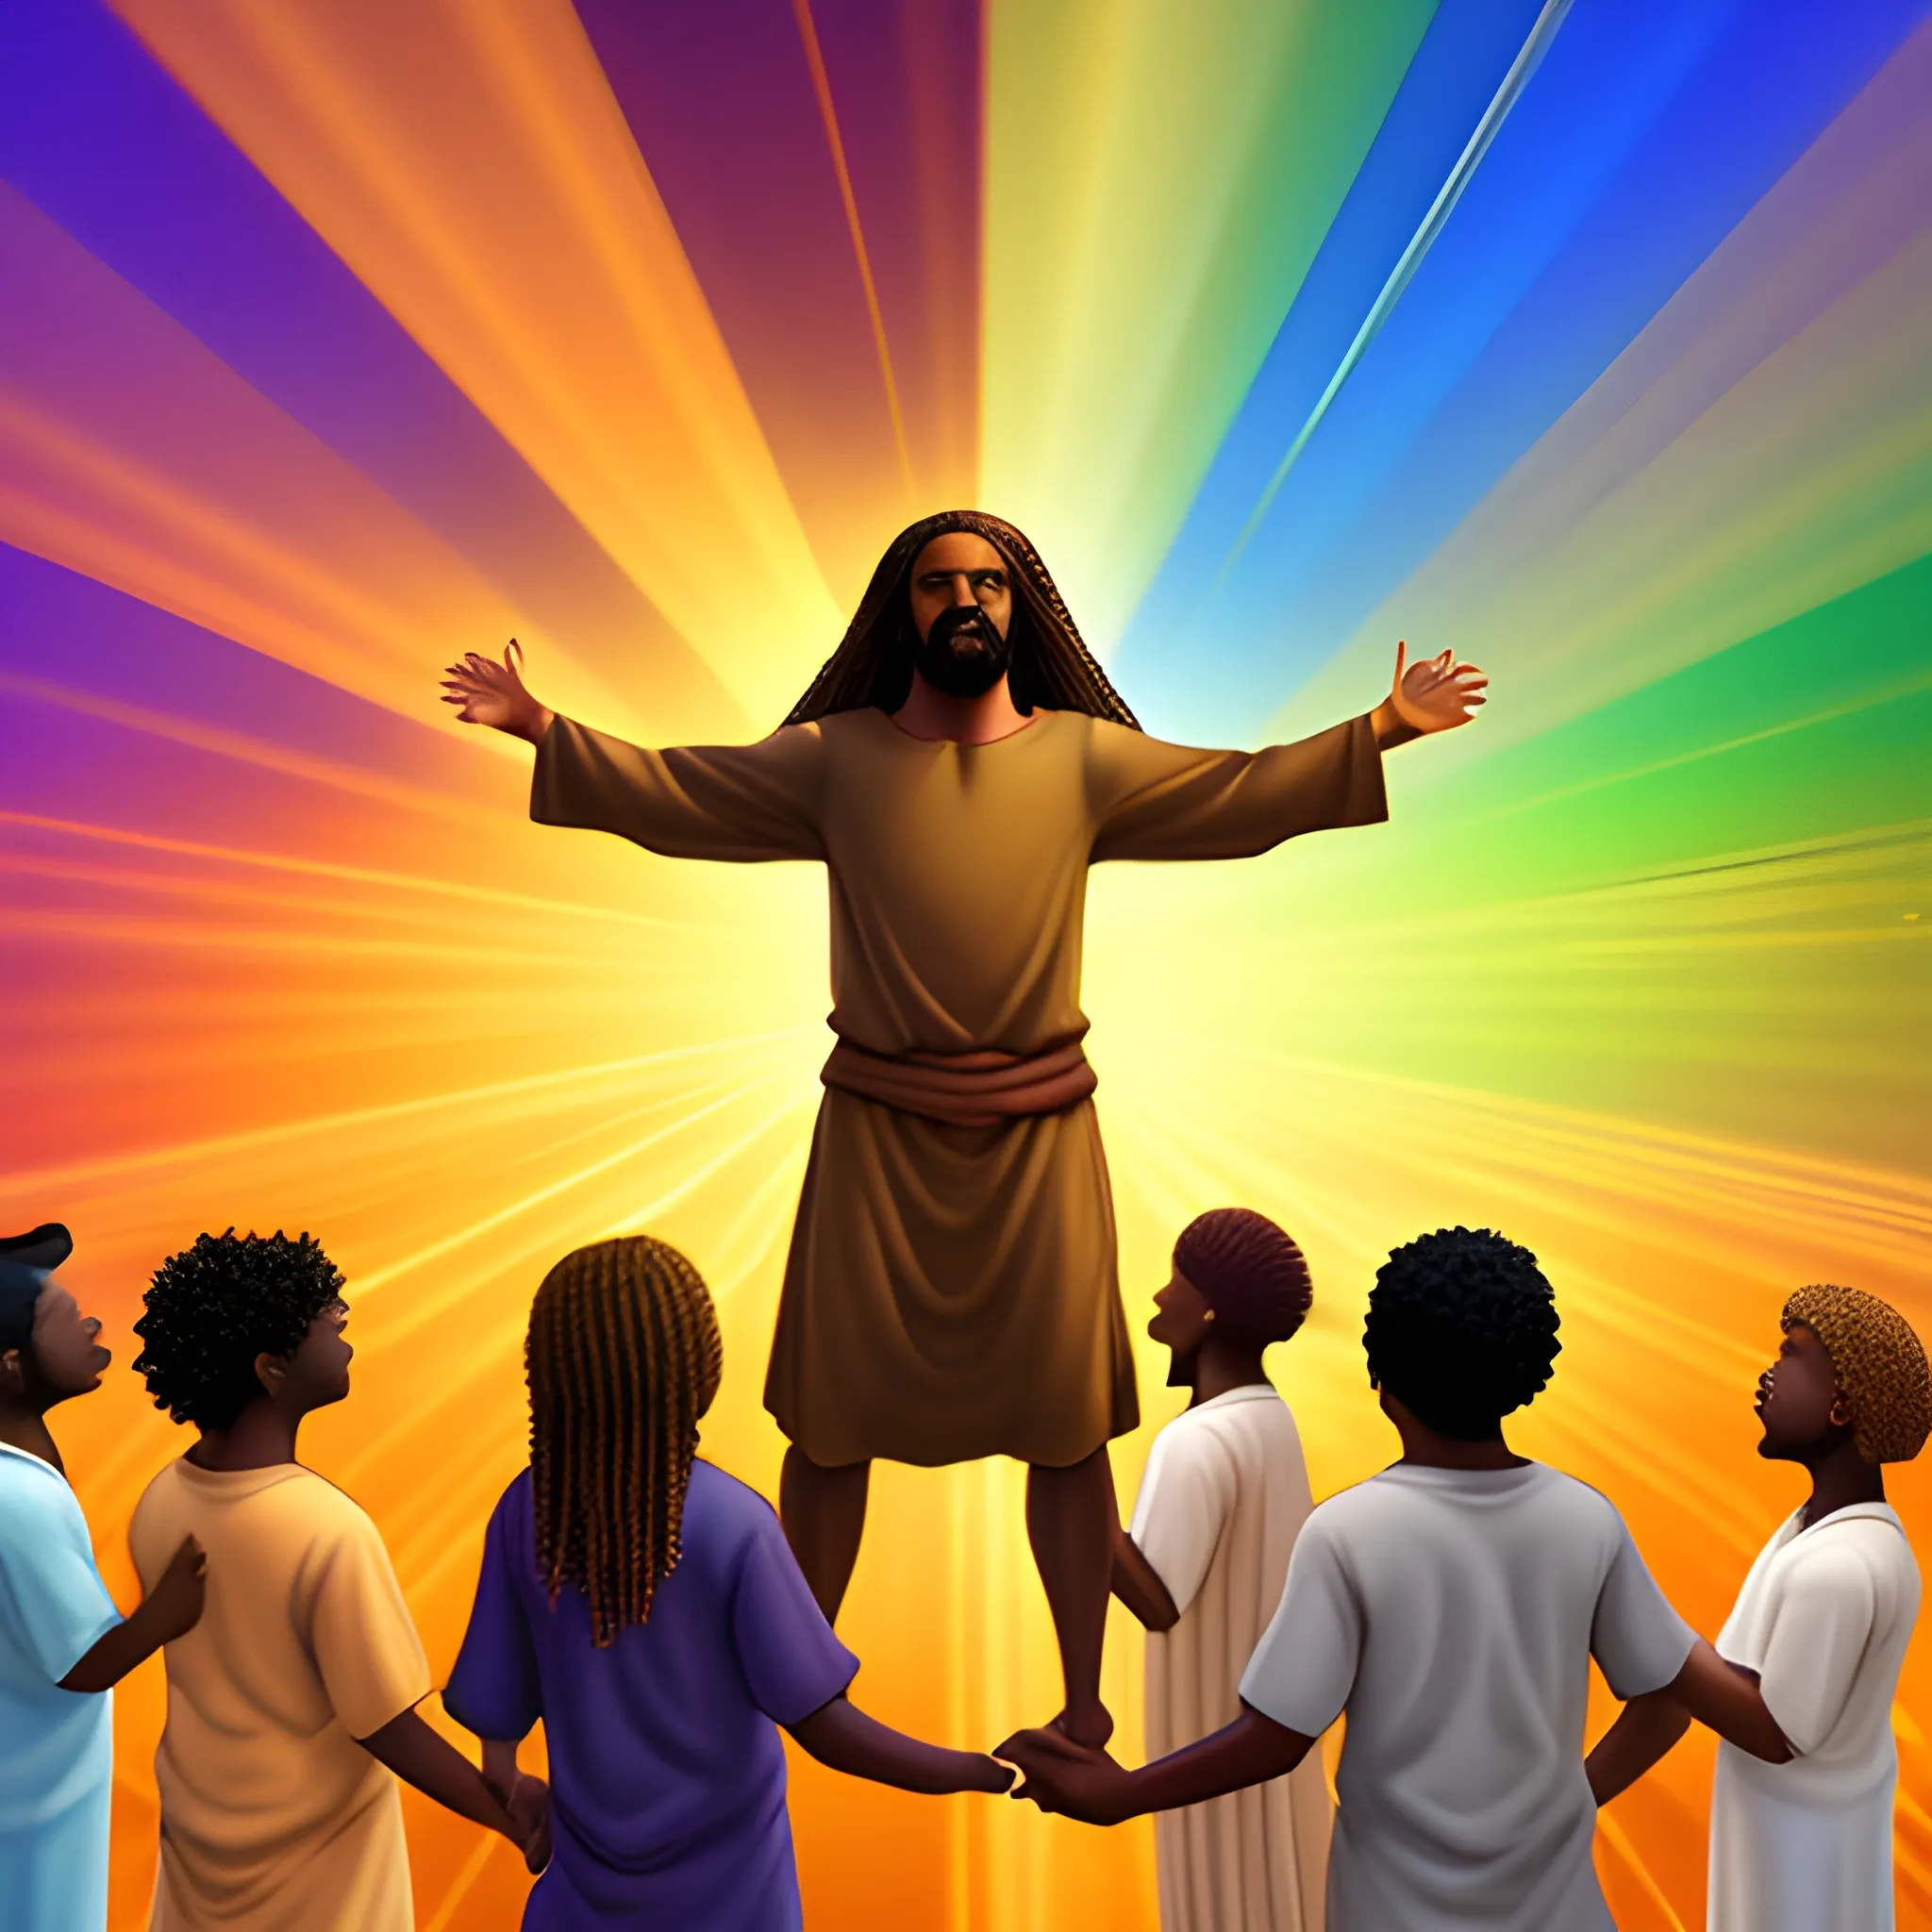 African American Jesus with Jewish face and brown skin and long golden hair surrounded by light flying into the sky full of beautiful colors and hand of GOD reaching down from a cloud, 3D